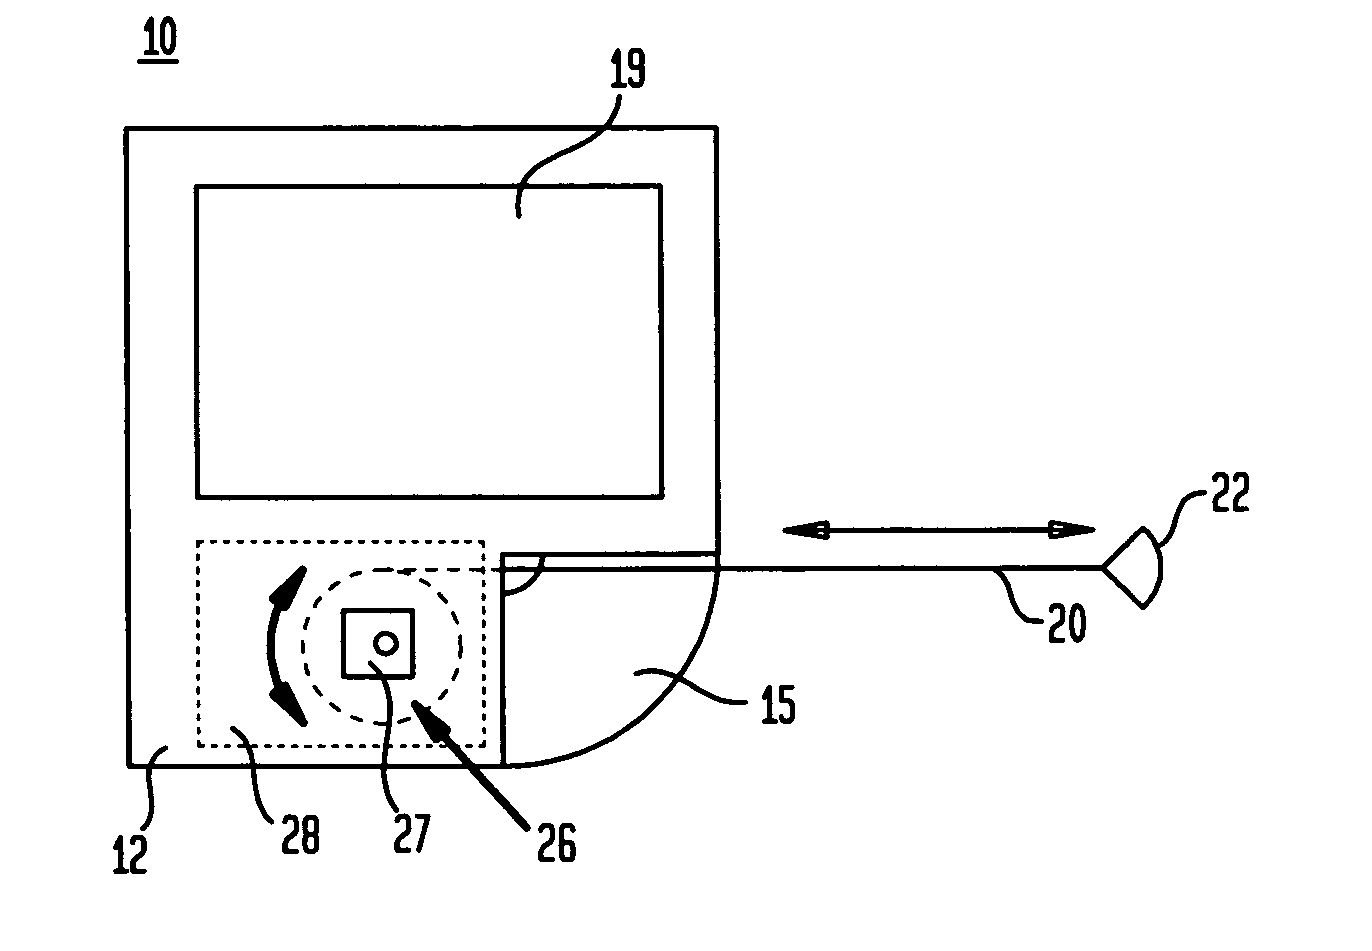 Retractable string interface for stationary and portable devices